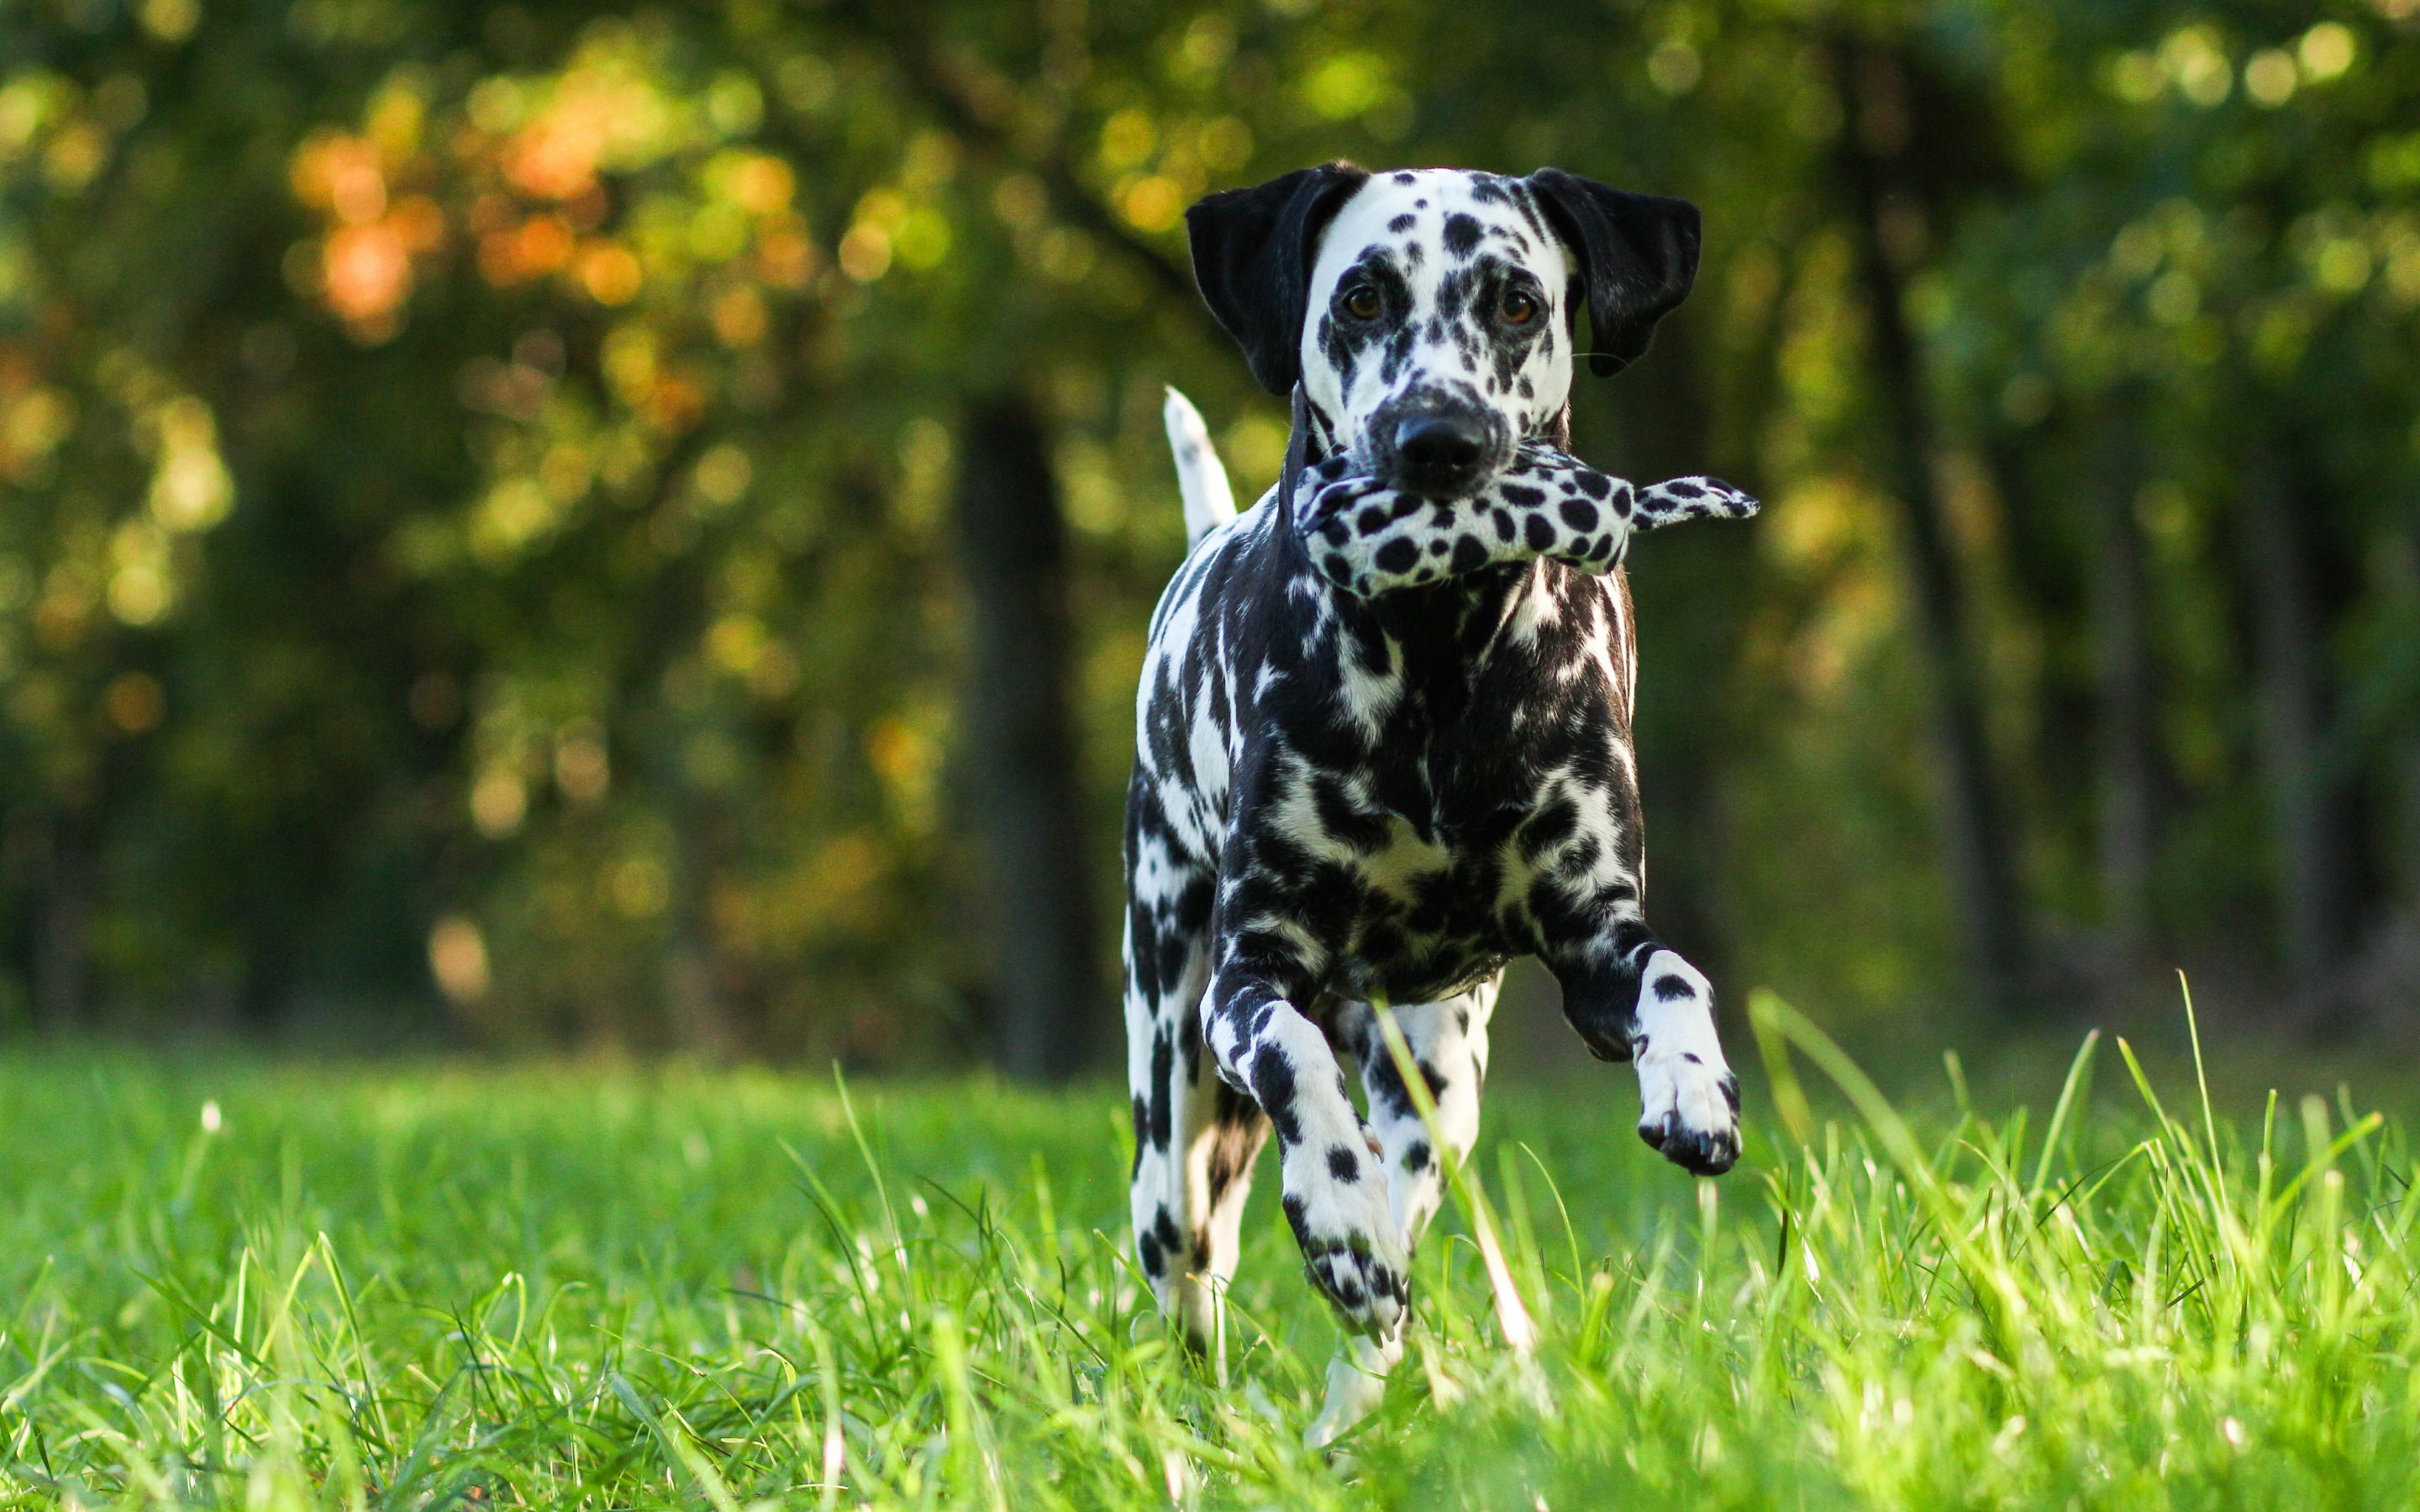 Free Dalmatian Wallpapers in HD Quality Resolution | Apups.com